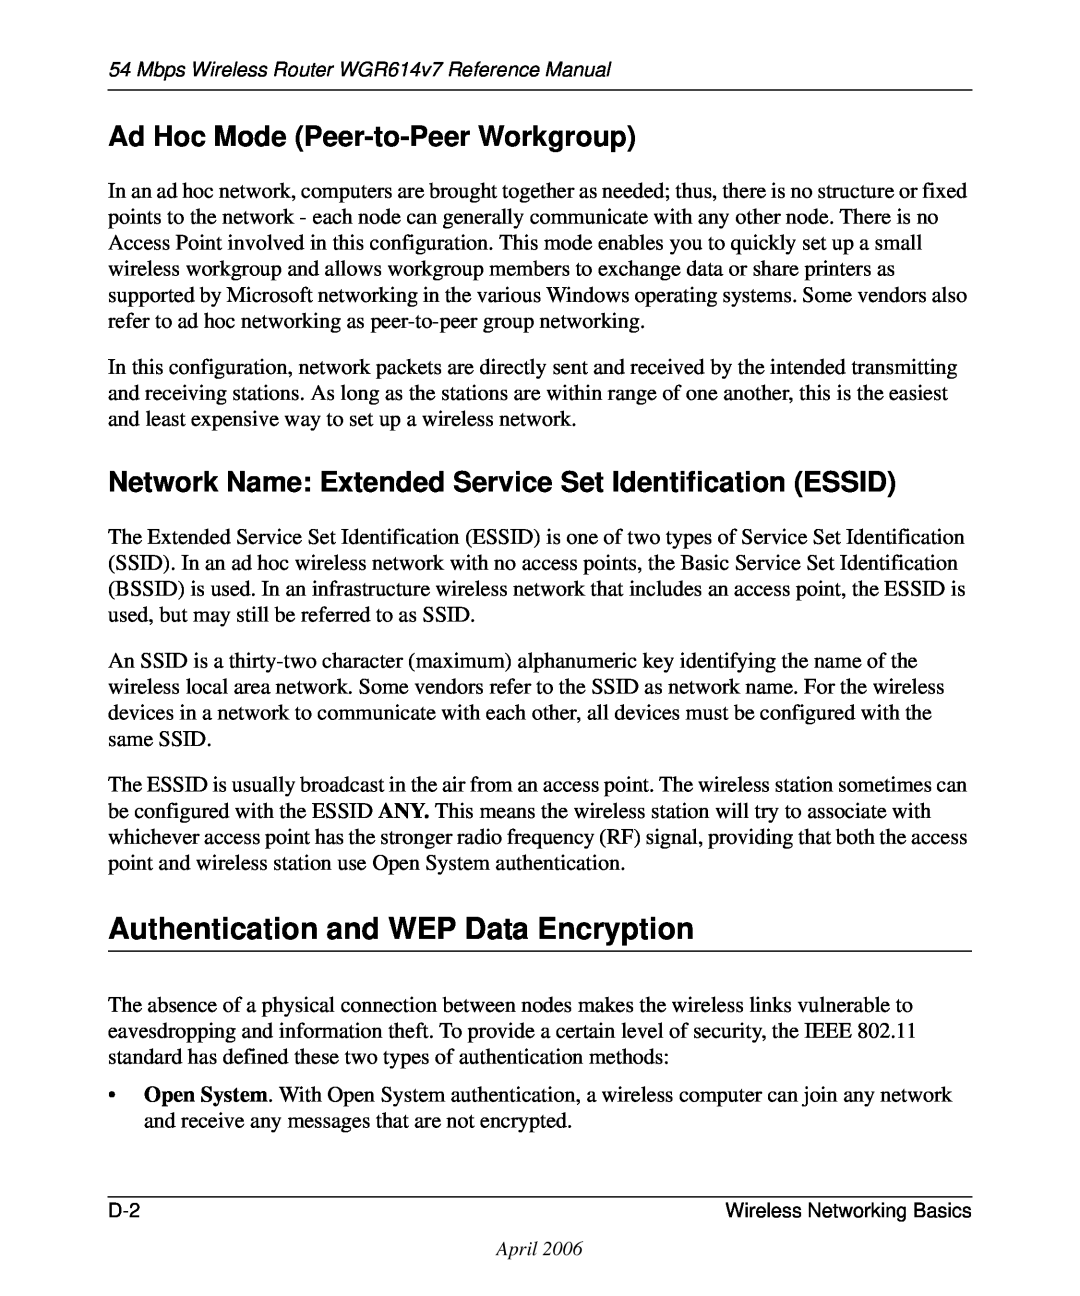 NETGEAR WGR614v7 manual Authentication and WEP Data Encryption, Ad Hoc Mode Peer-to-Peer Workgroup 